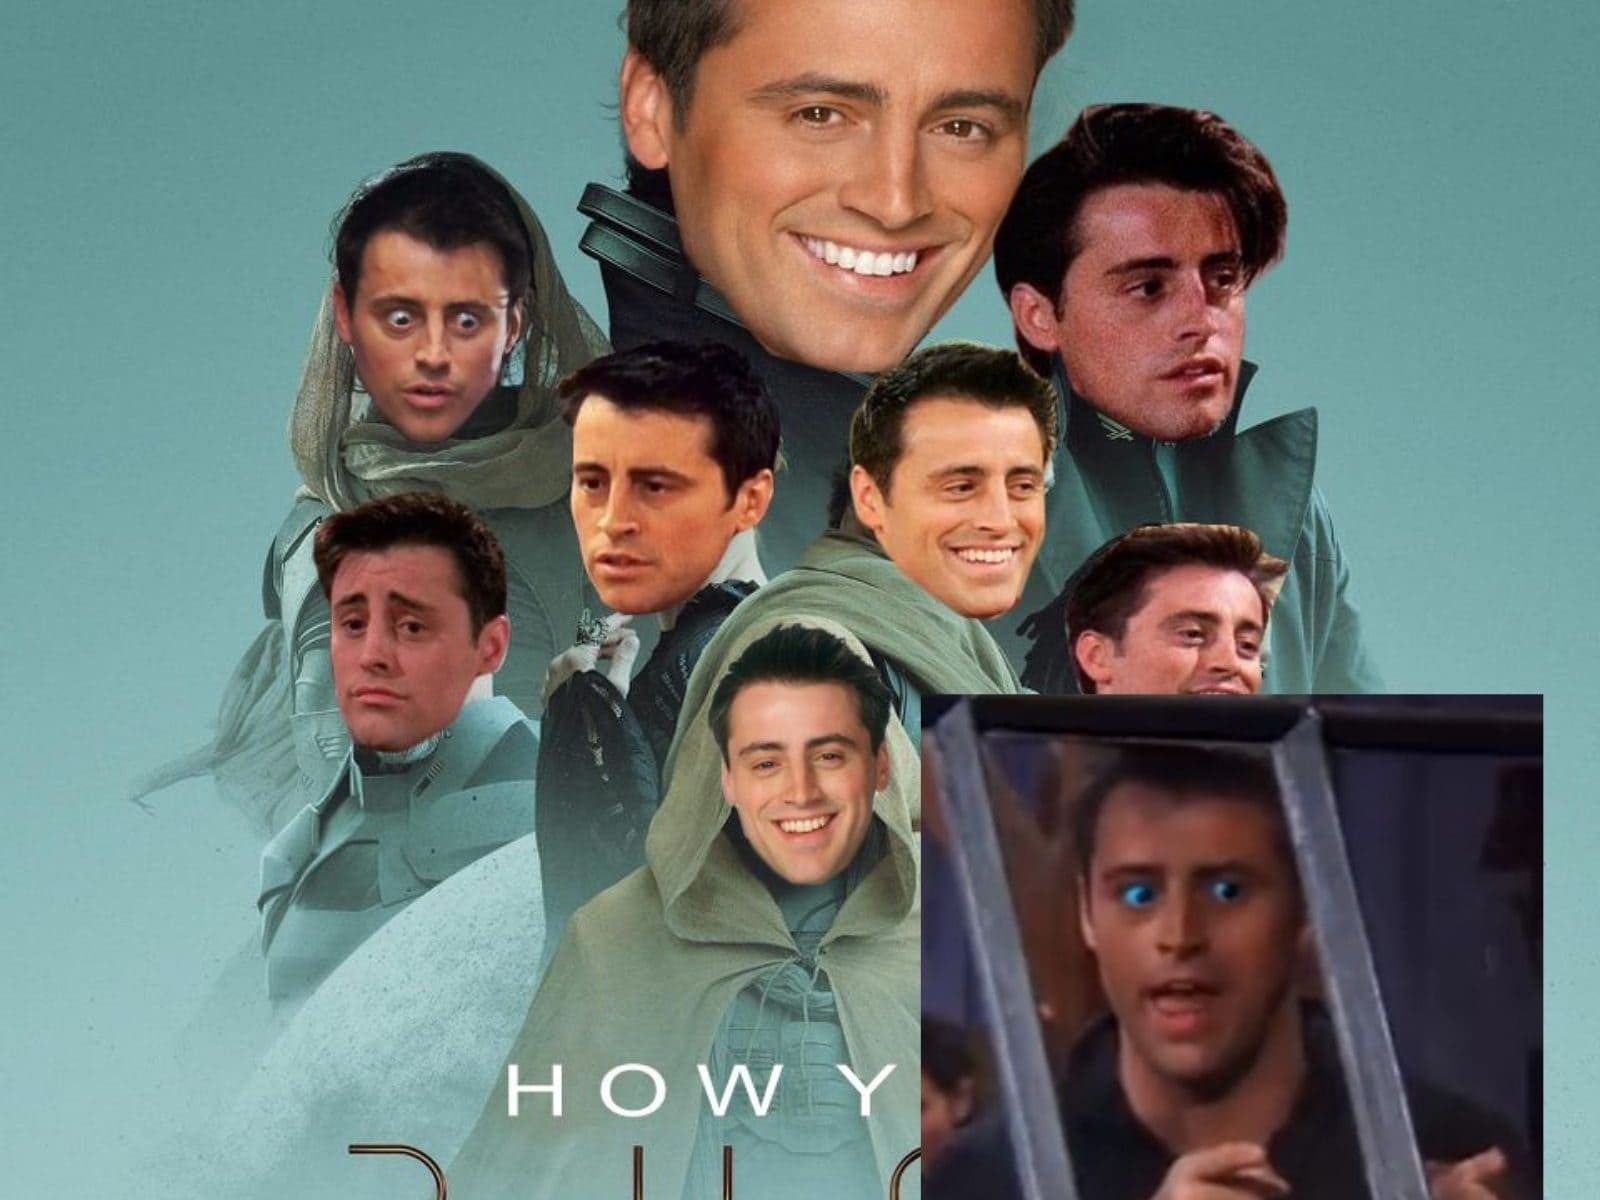 How you doin someone made a joey poster of dune movie and whats not to like